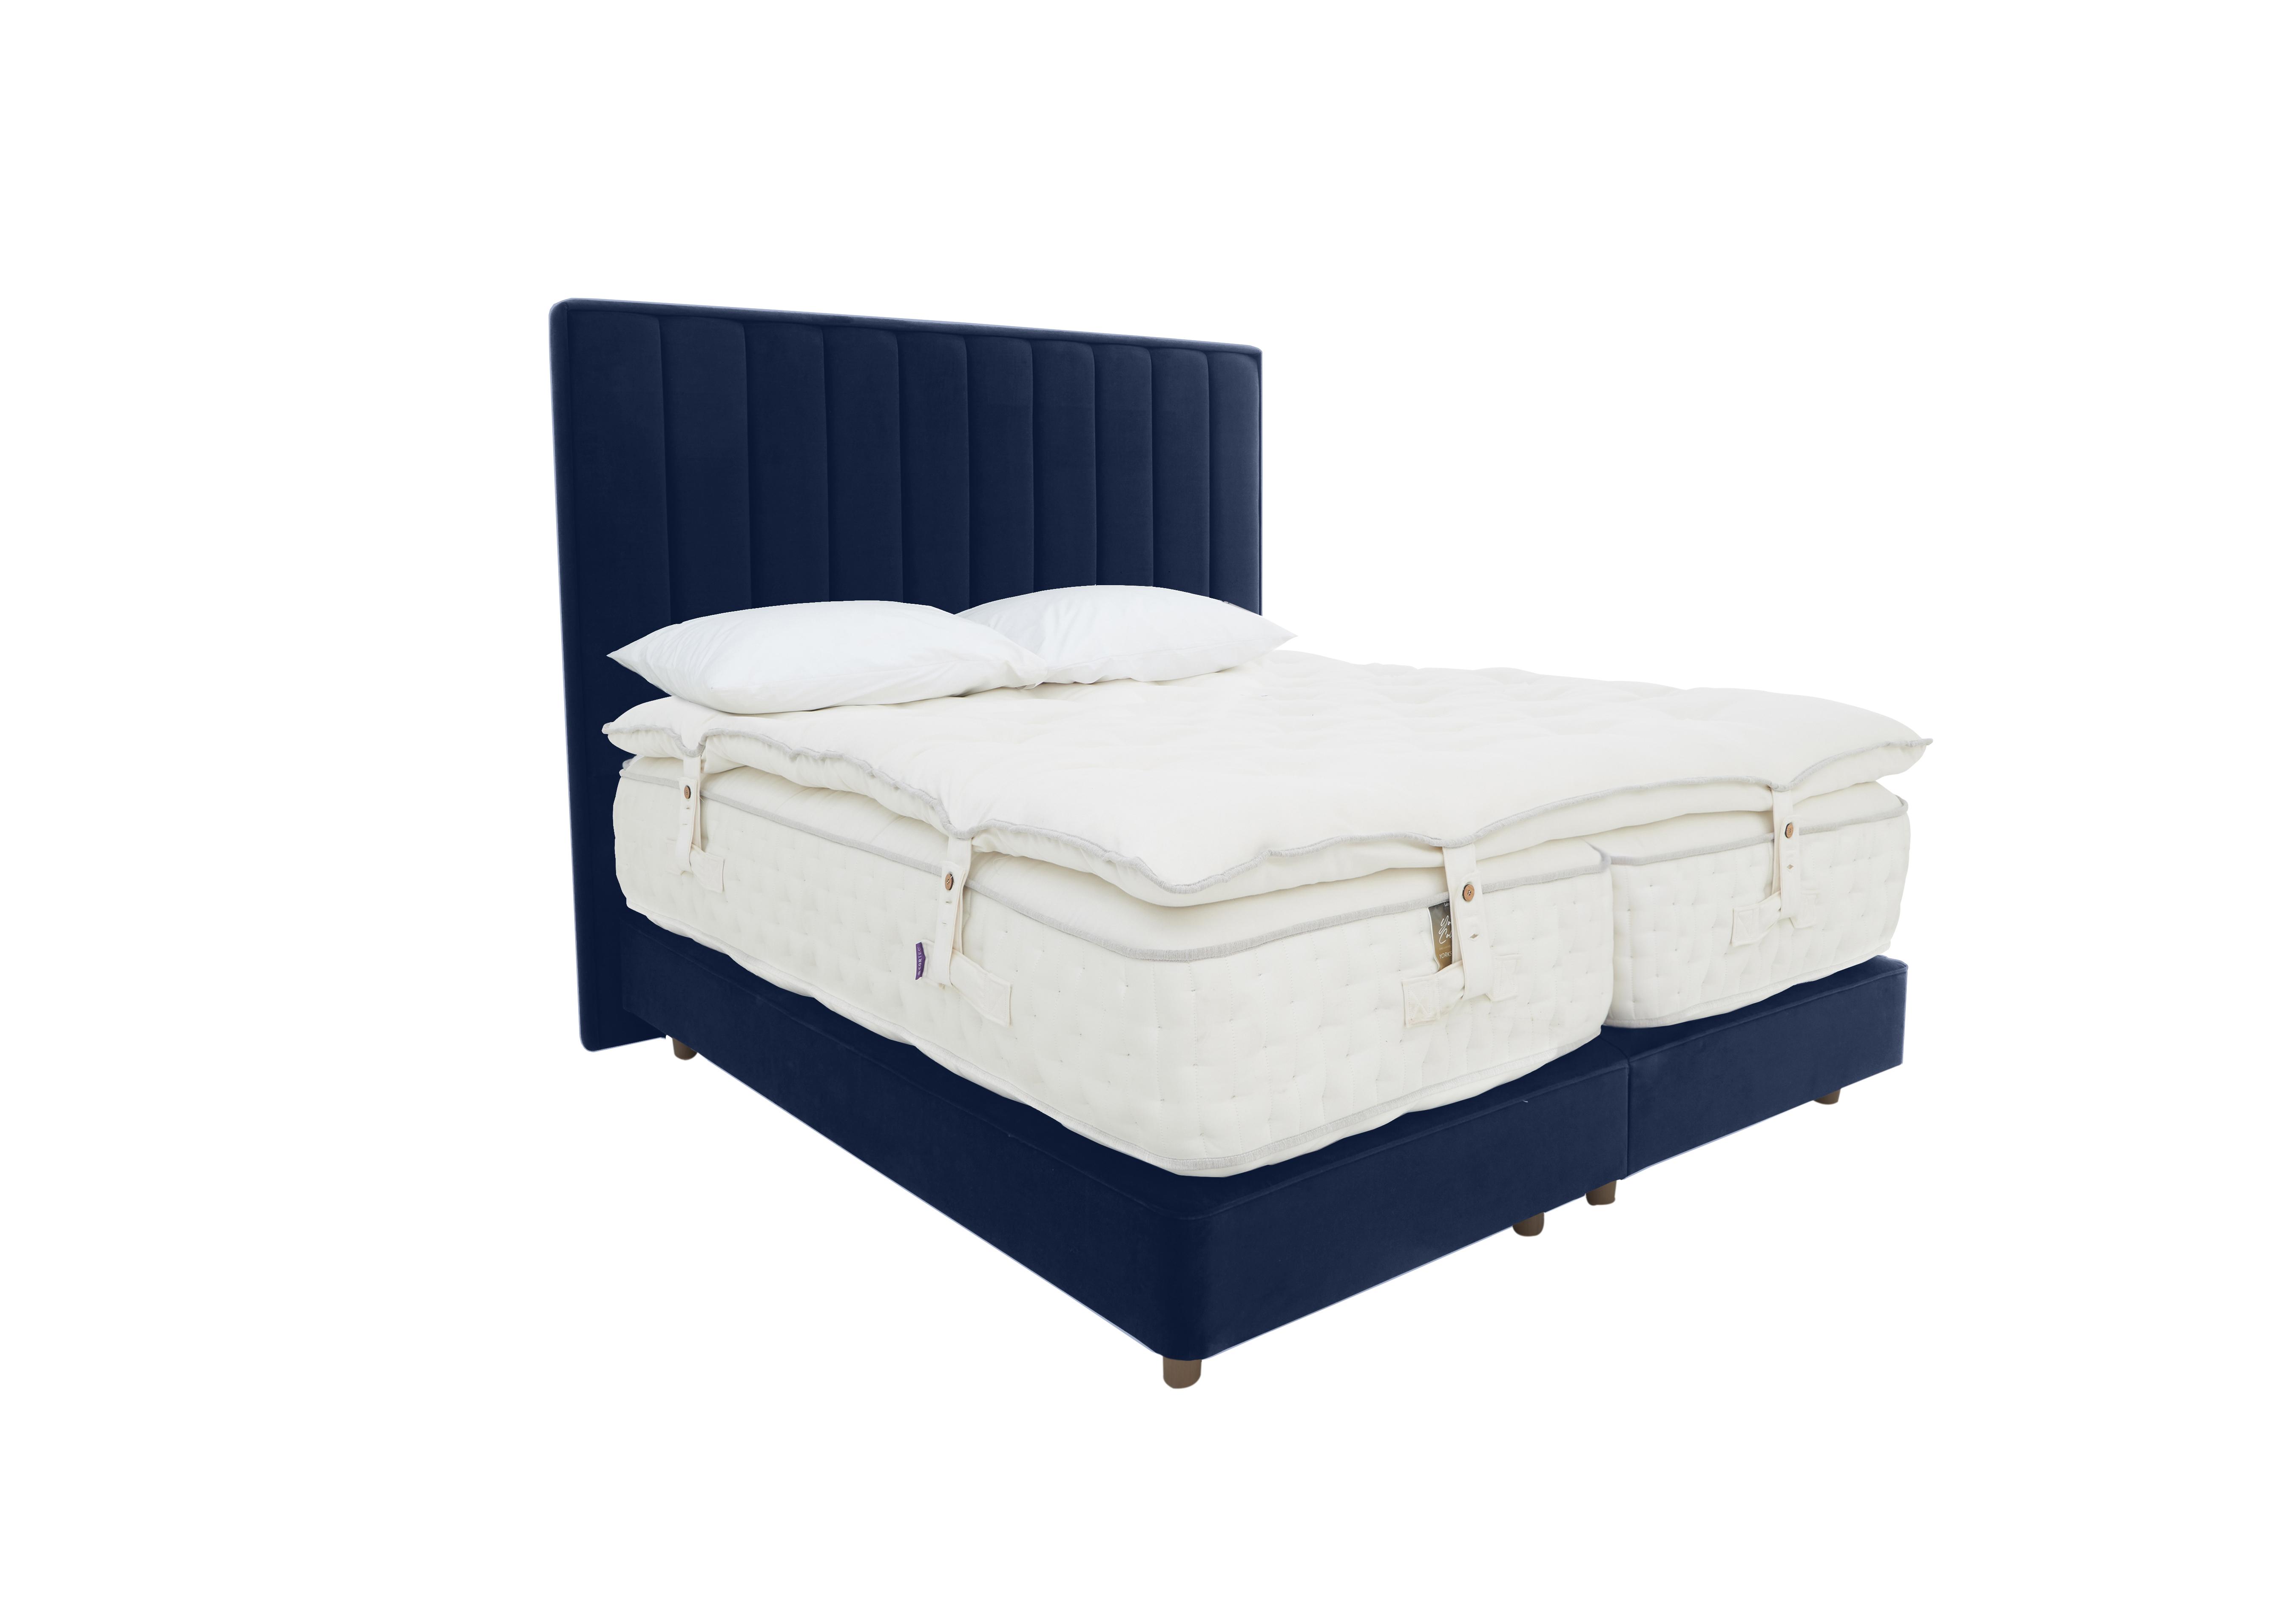 Yorkshire 40K Shallow Divan Set with Zip and Link Mattress with Mattress Topper in Seven Navy on Furniture Village